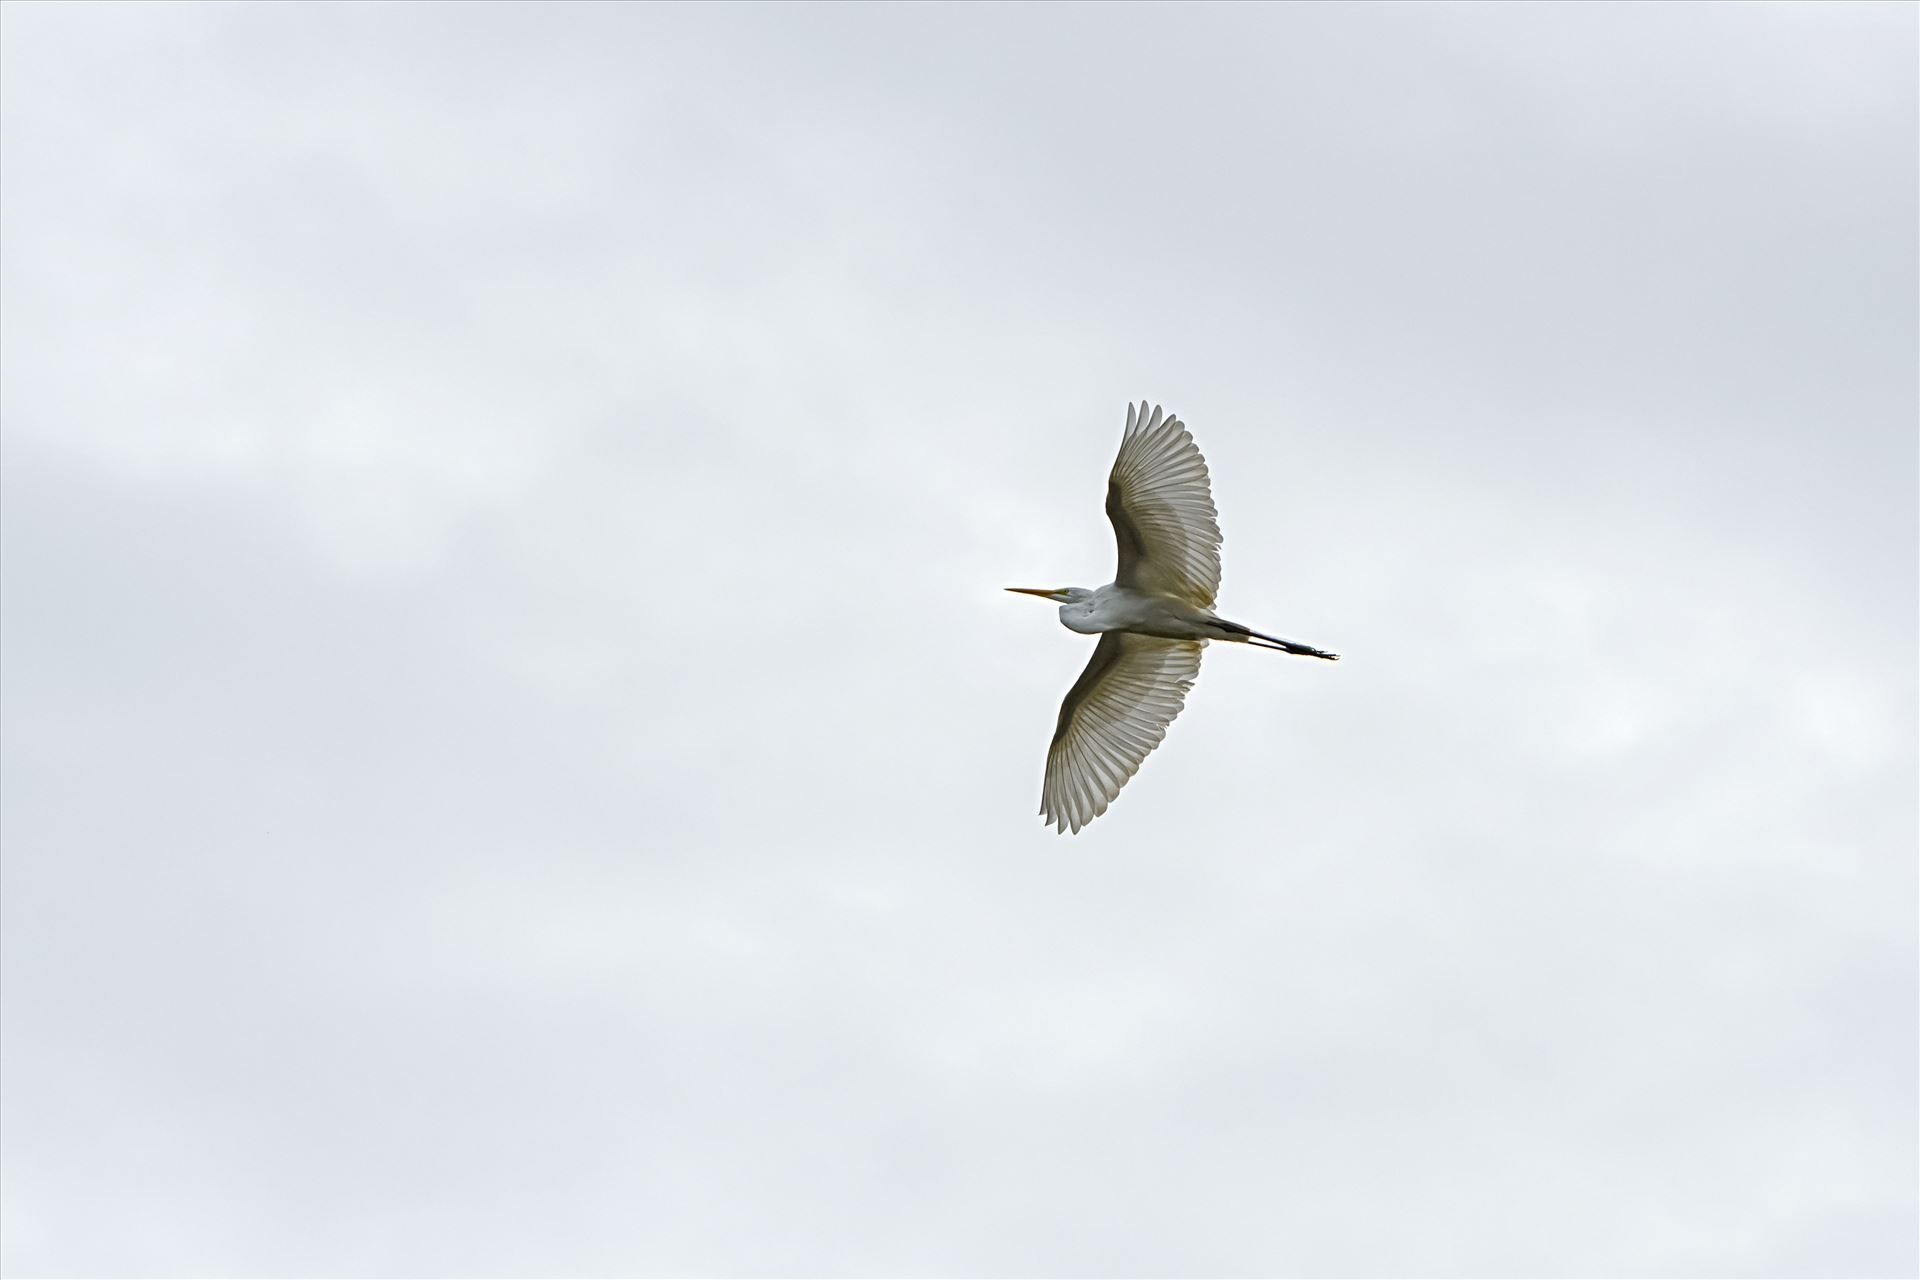 great white egert in flight ss alamy 8106865.jpg - Great white egret flying high over Lake Caroline in Panama city, Florida. by Terry Kelly Photography